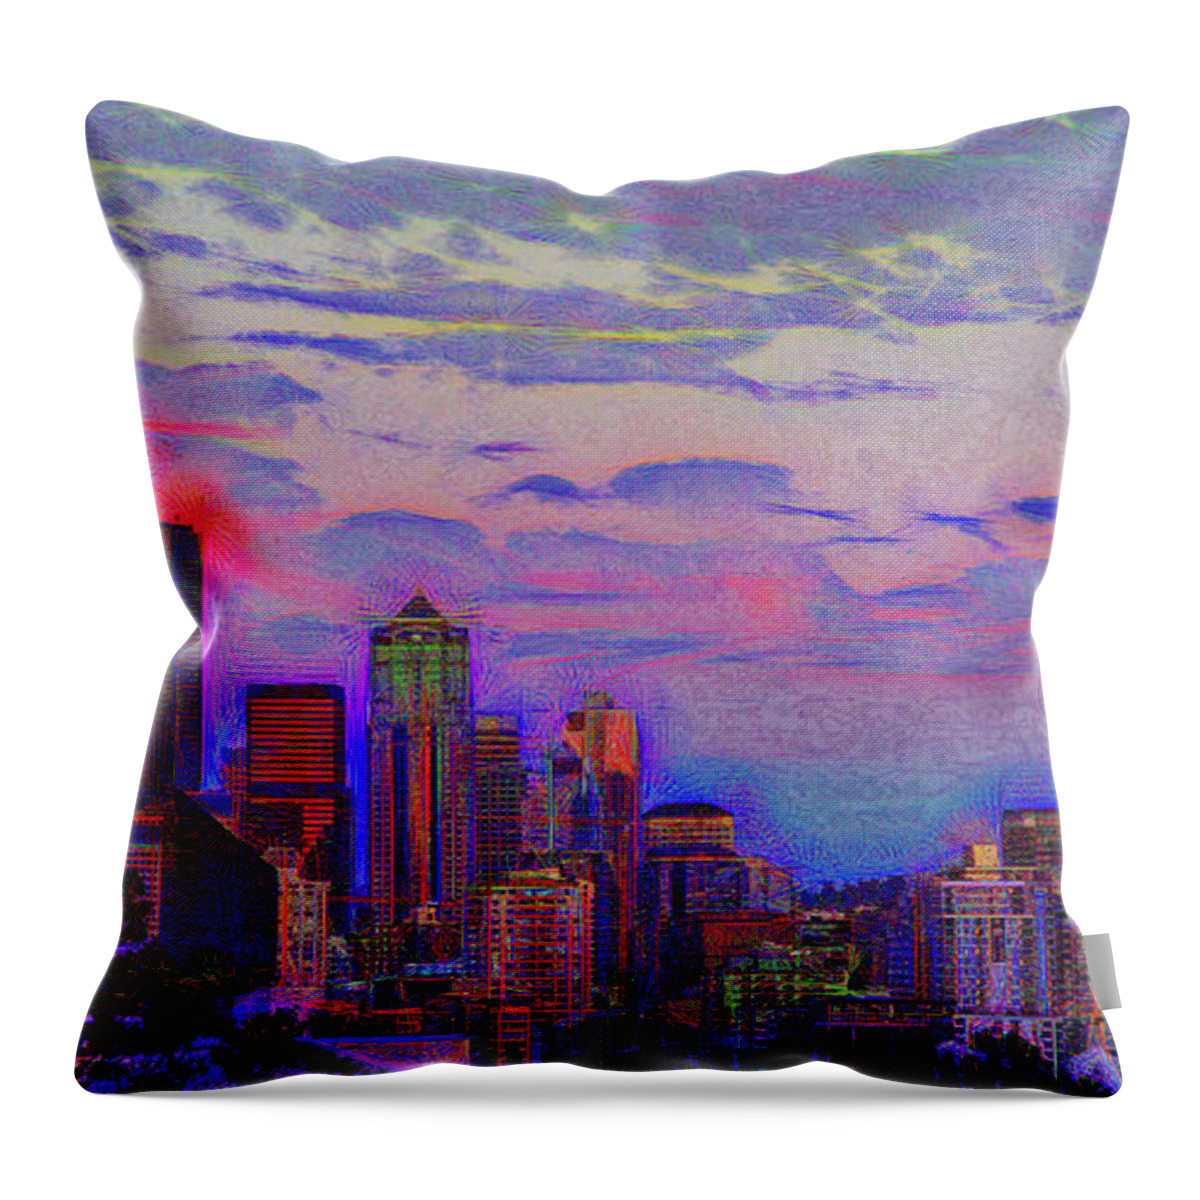 Seattle Throw Pillow featuring the photograph Seattle Colorblast Pano by Judi Kubes